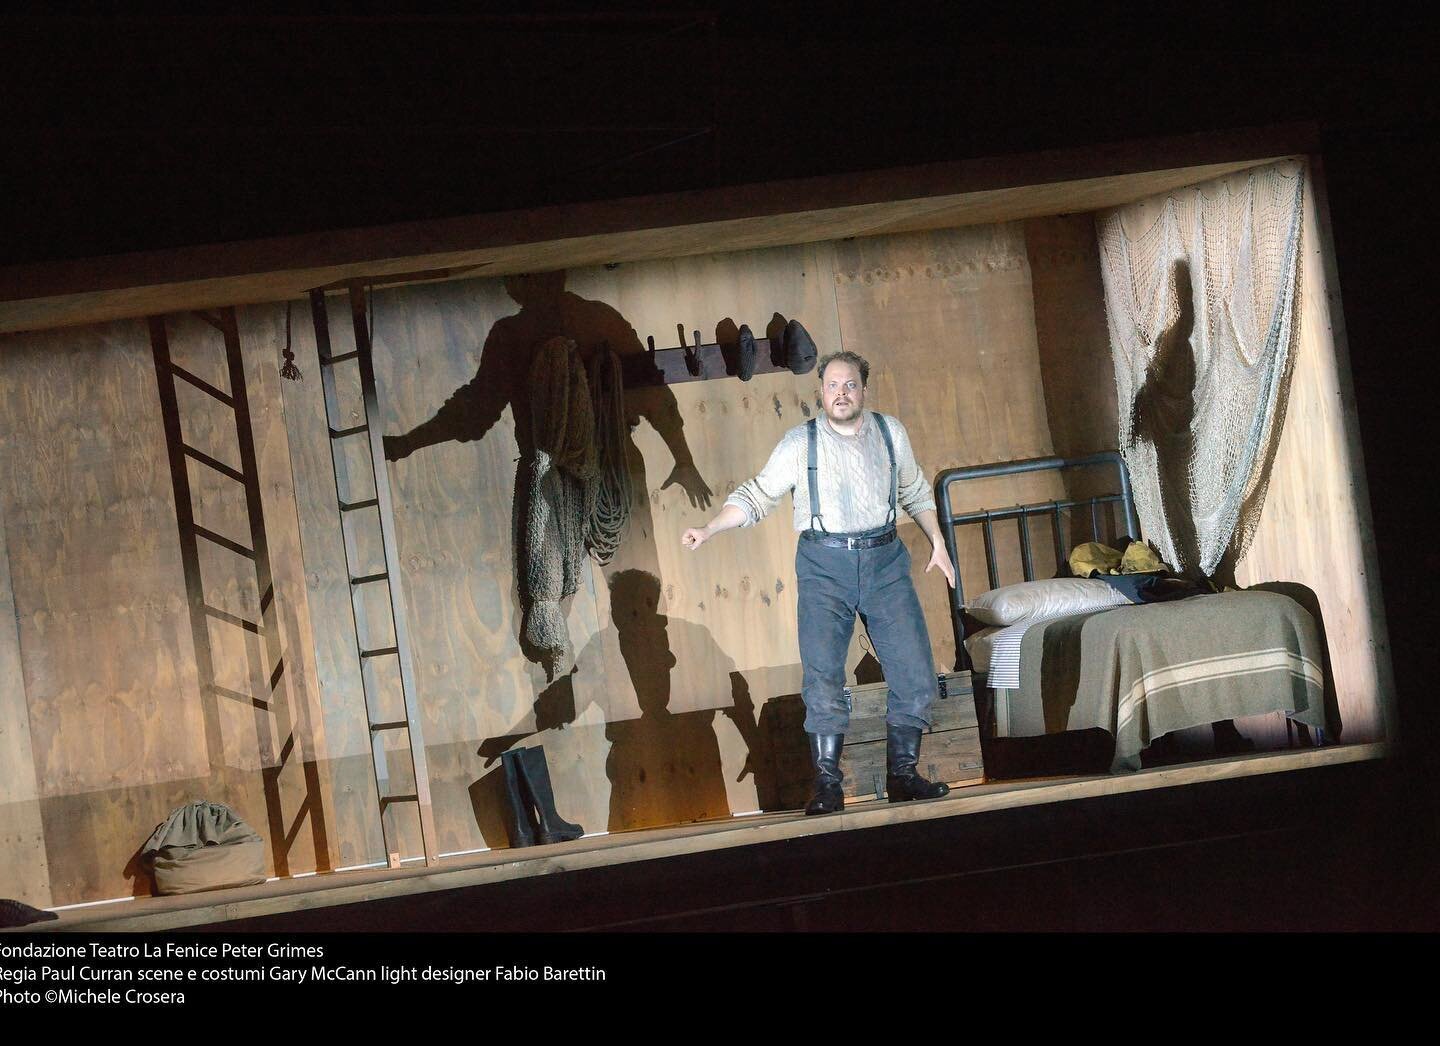 Triumph for Andrew Staples @ajrstaples  making his debut with the title role of Britten&rsquo;s Peter Grimes at Teatro La Fenice. @teatrolafenice 

&ldquo;Approaching one of the most complex tenor roles in the opera repertoire, Staples emerged triump